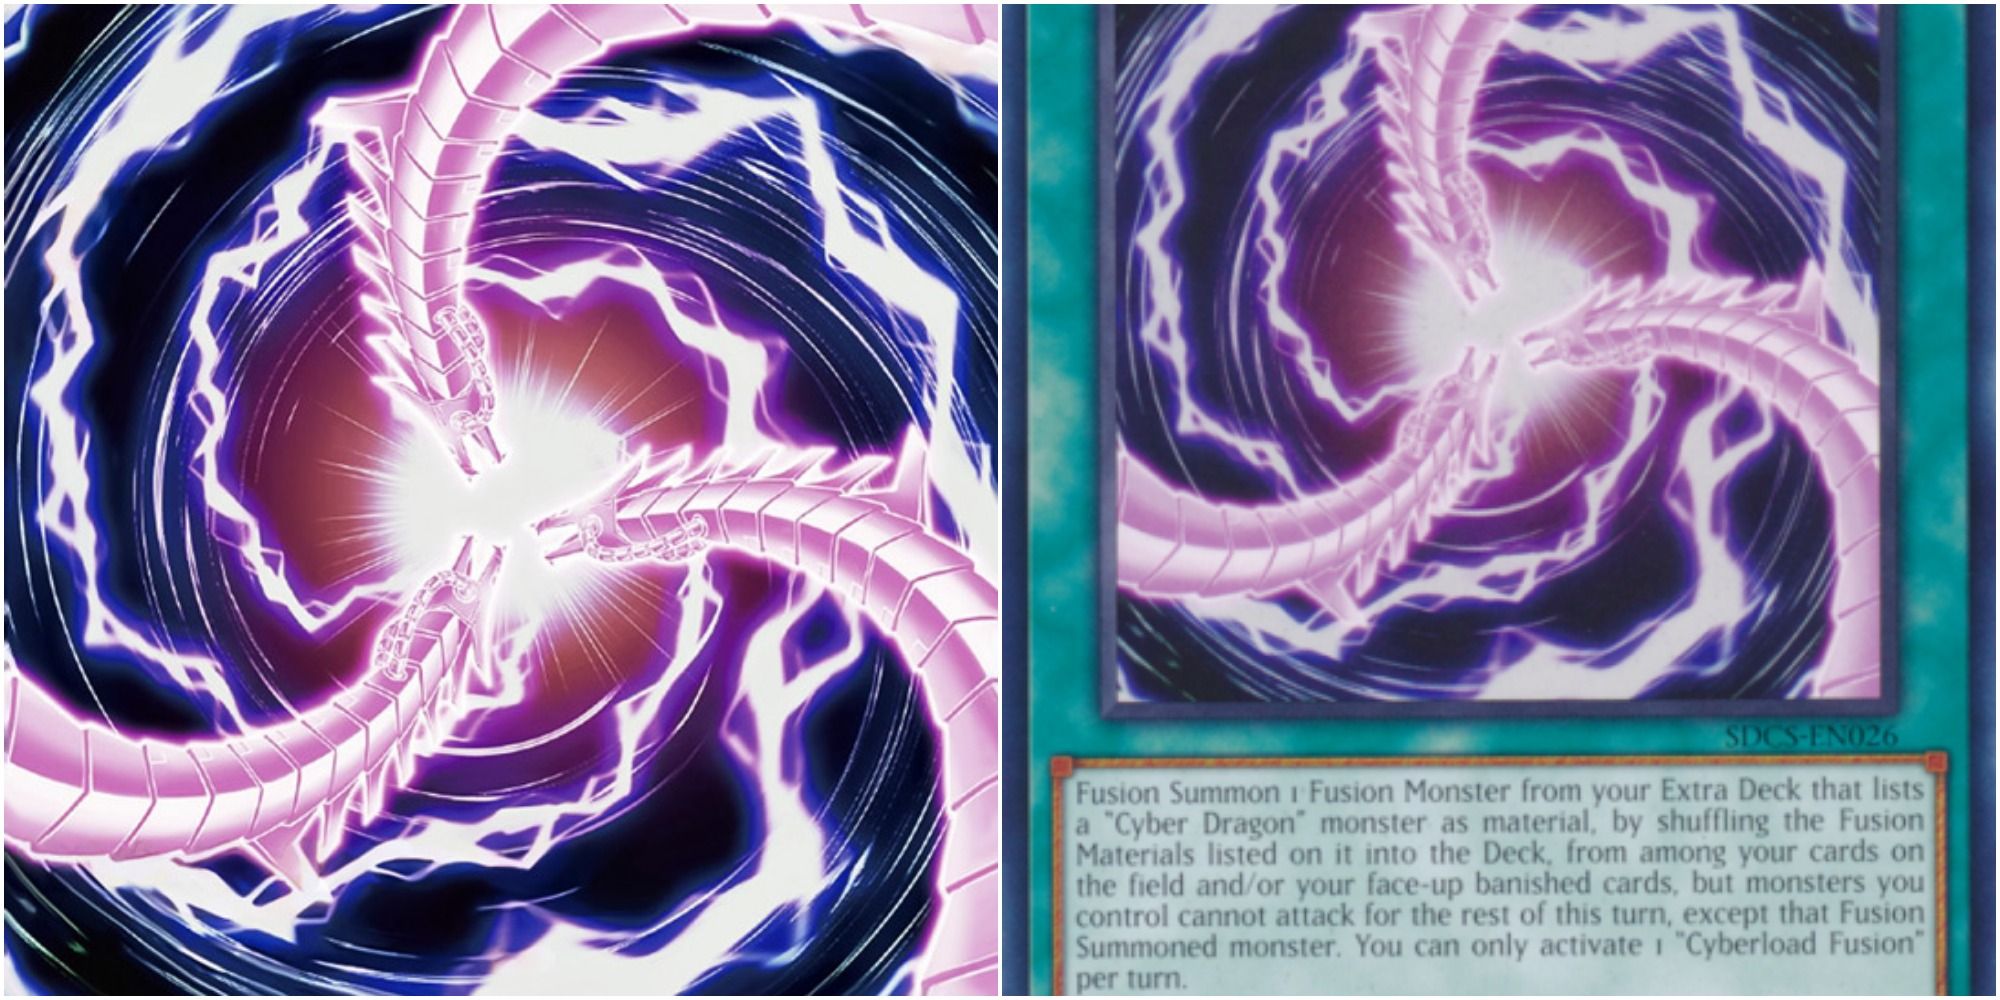 yugioh cyberload fusion card art and text